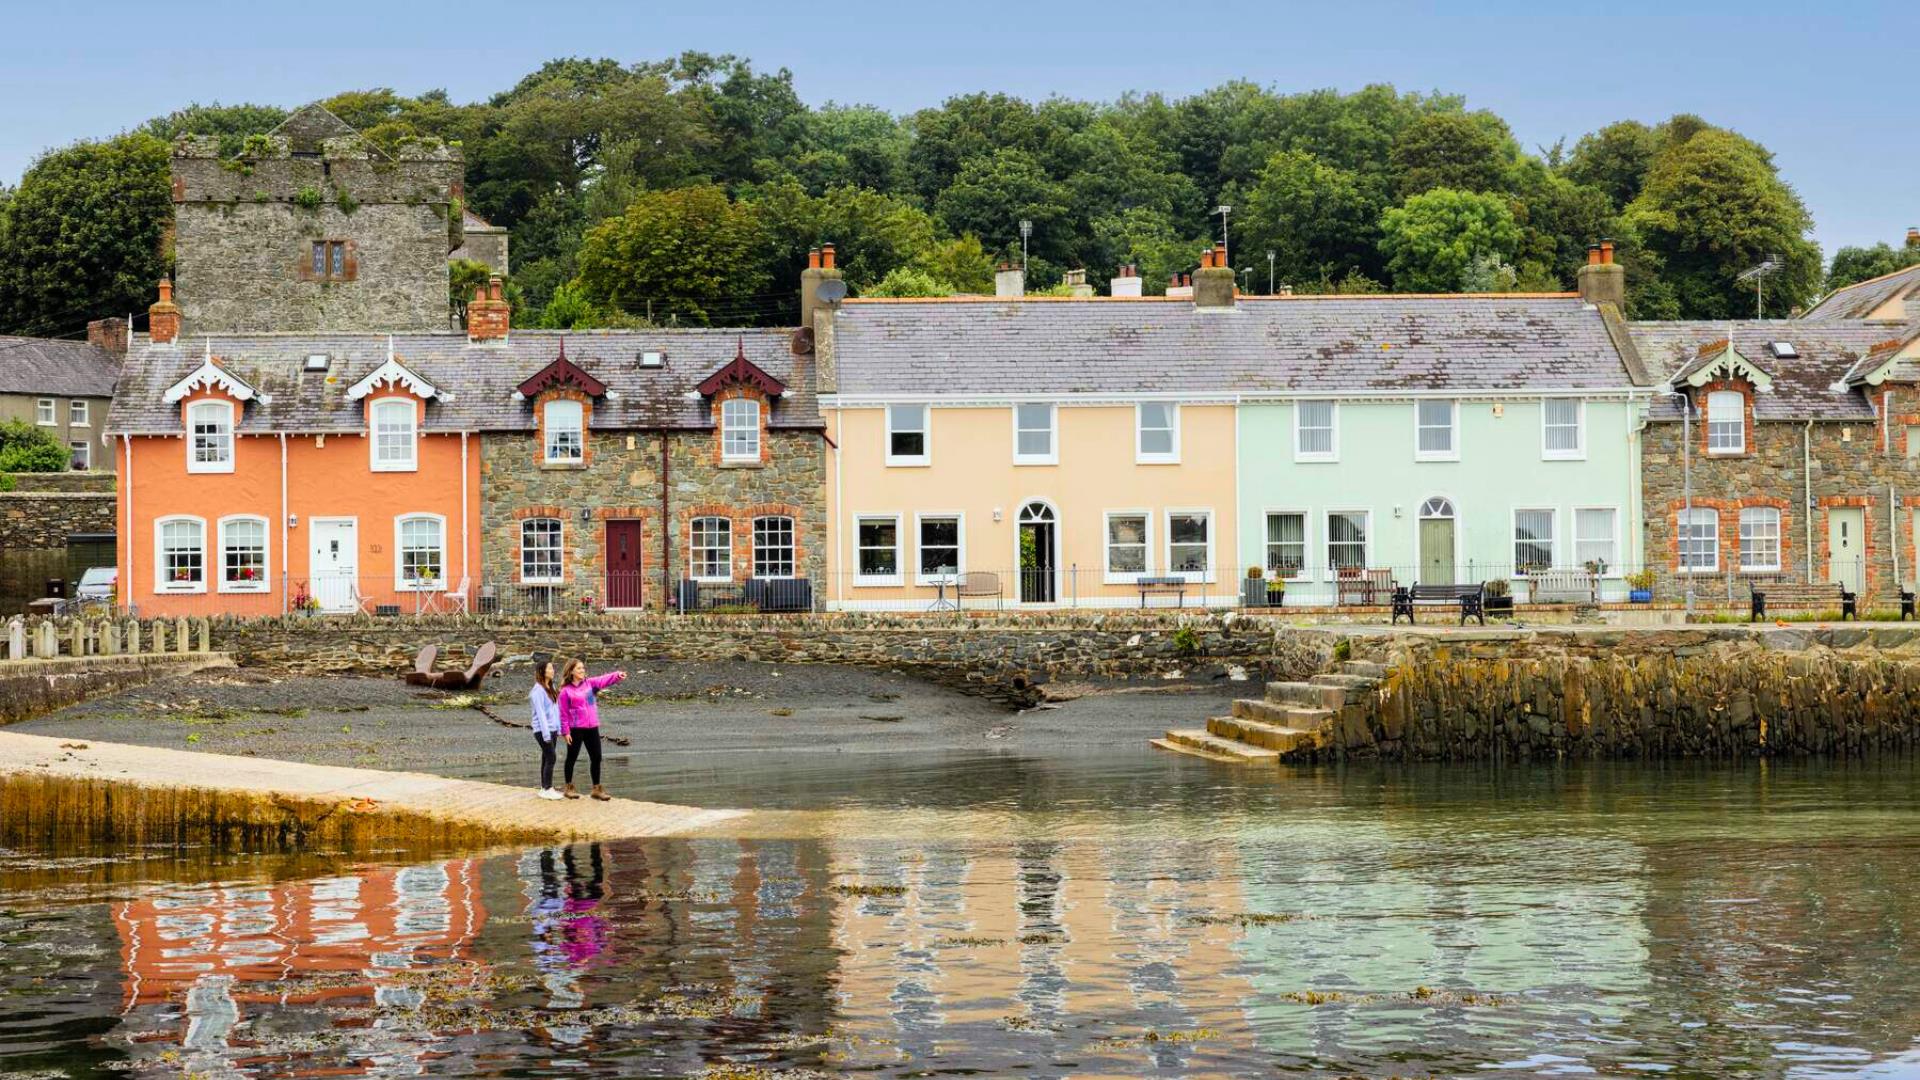 Two women look out over the lough at Strangford, with colourful houses in the background